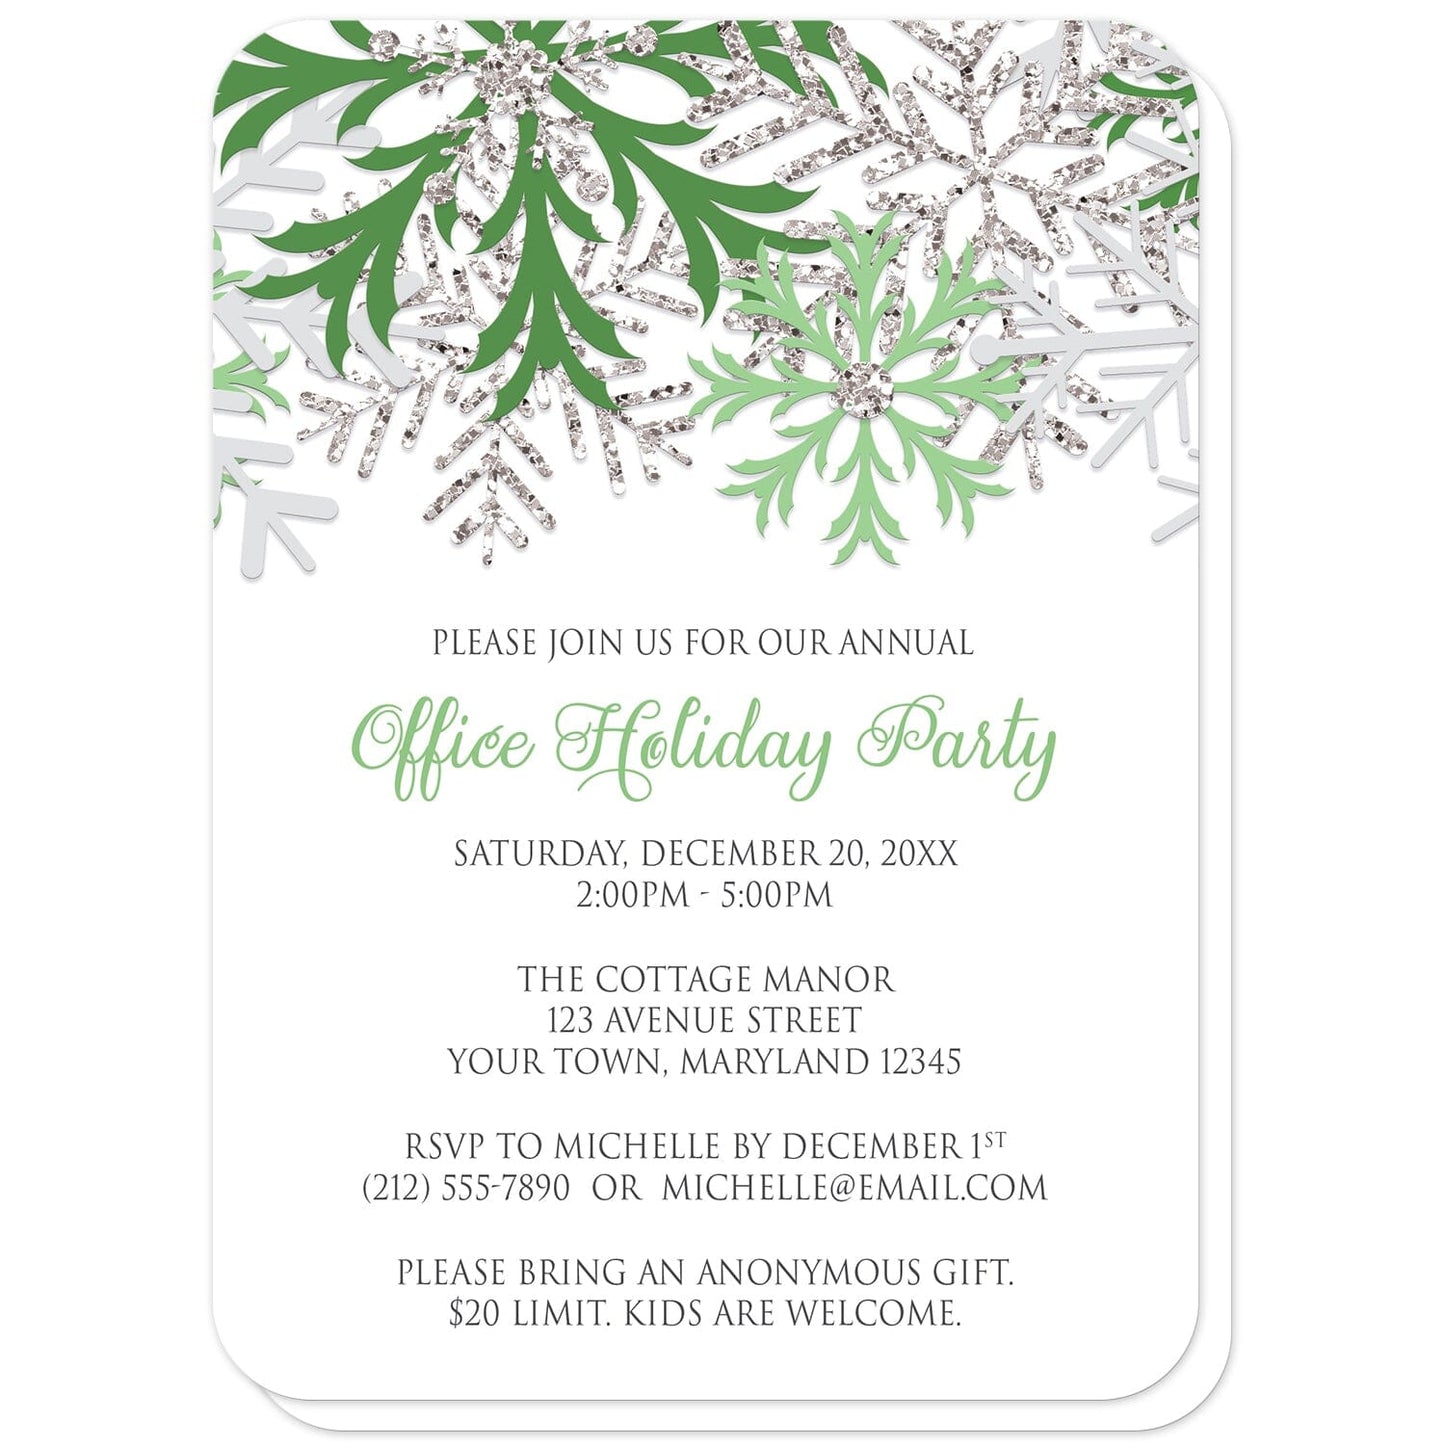 Winter Green Silver Snowflake Holiday Party Invitations (with rounded corners) at Artistically Invited. Winter green silver snowflake holiday party invitations with green, light green, and silver-colored glitter-illustrated snowflakes over a white background. Your personalized party details for your home or office party are custom printed in gray and green. The occasion title is printed in a whimsical green script font while your remaining details are printed in an all-capital letters gray serif font.